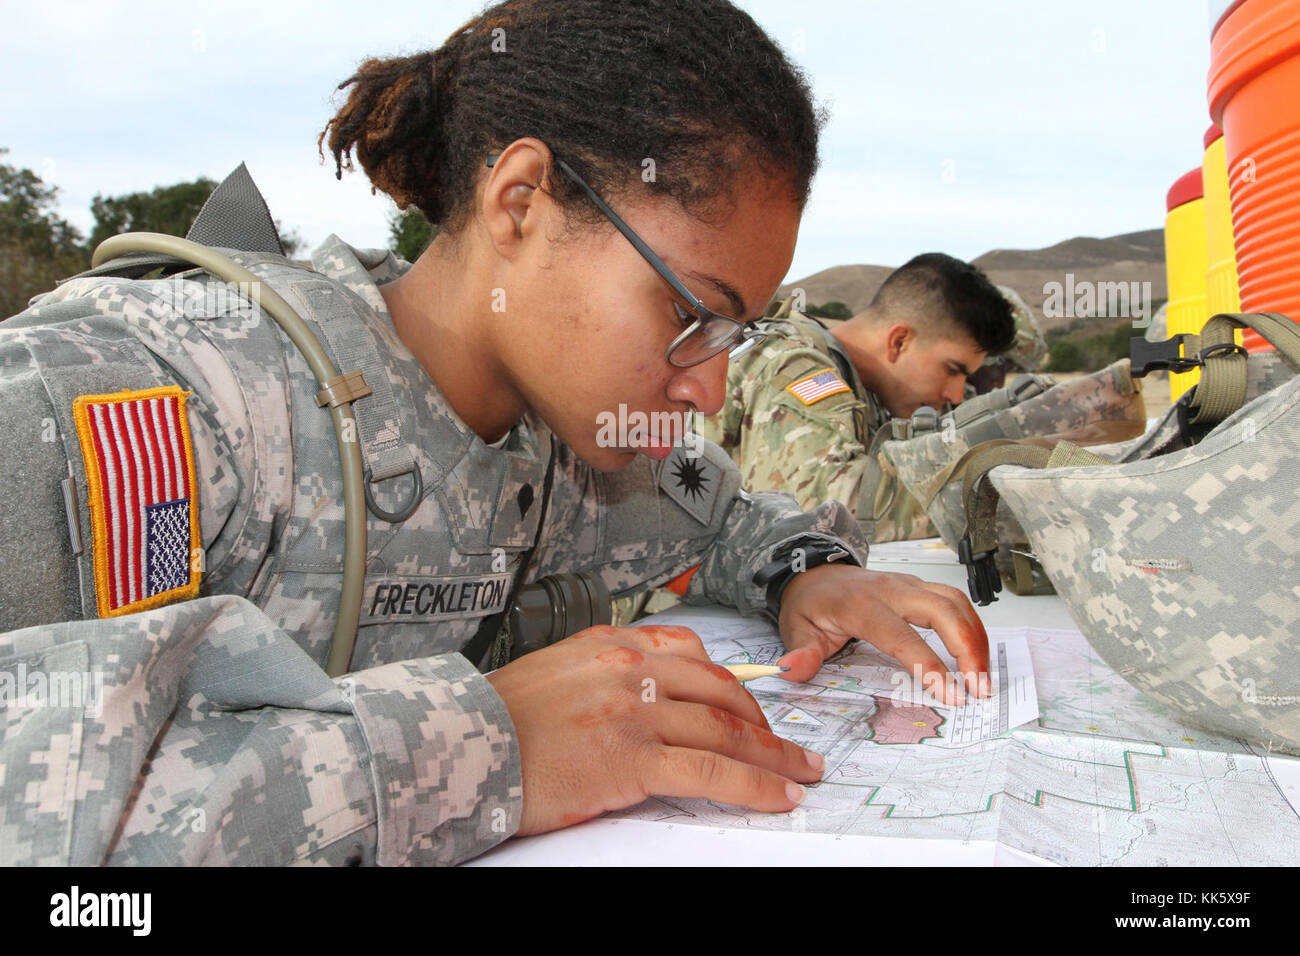 Spc. Emefa Freckleton uses a protractor and map to plot five coordinates Nov. 6 during the day land navigation section of the 2017-18 California Army National Guard Best Warrior Competition Nov. 5 at Camp San Luis Obispo, California. (Army National Guard photo by Staff Sgt. Eddie Siguenza) Stock Photo